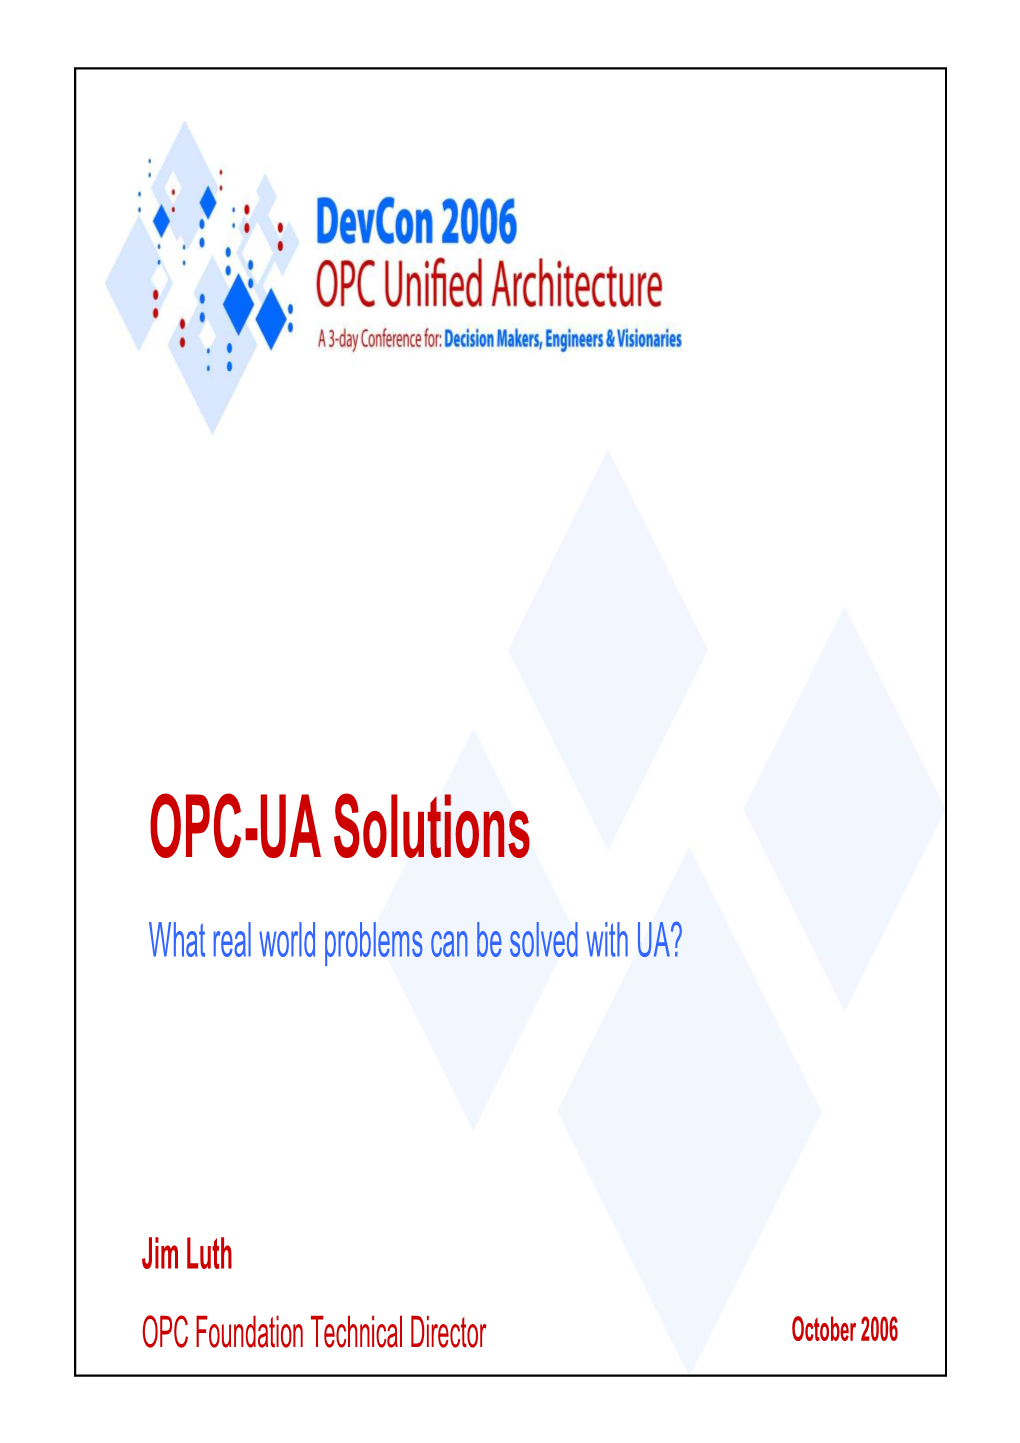 OPC-UA Solutions What Real World Problems Can Be Solved with UA?